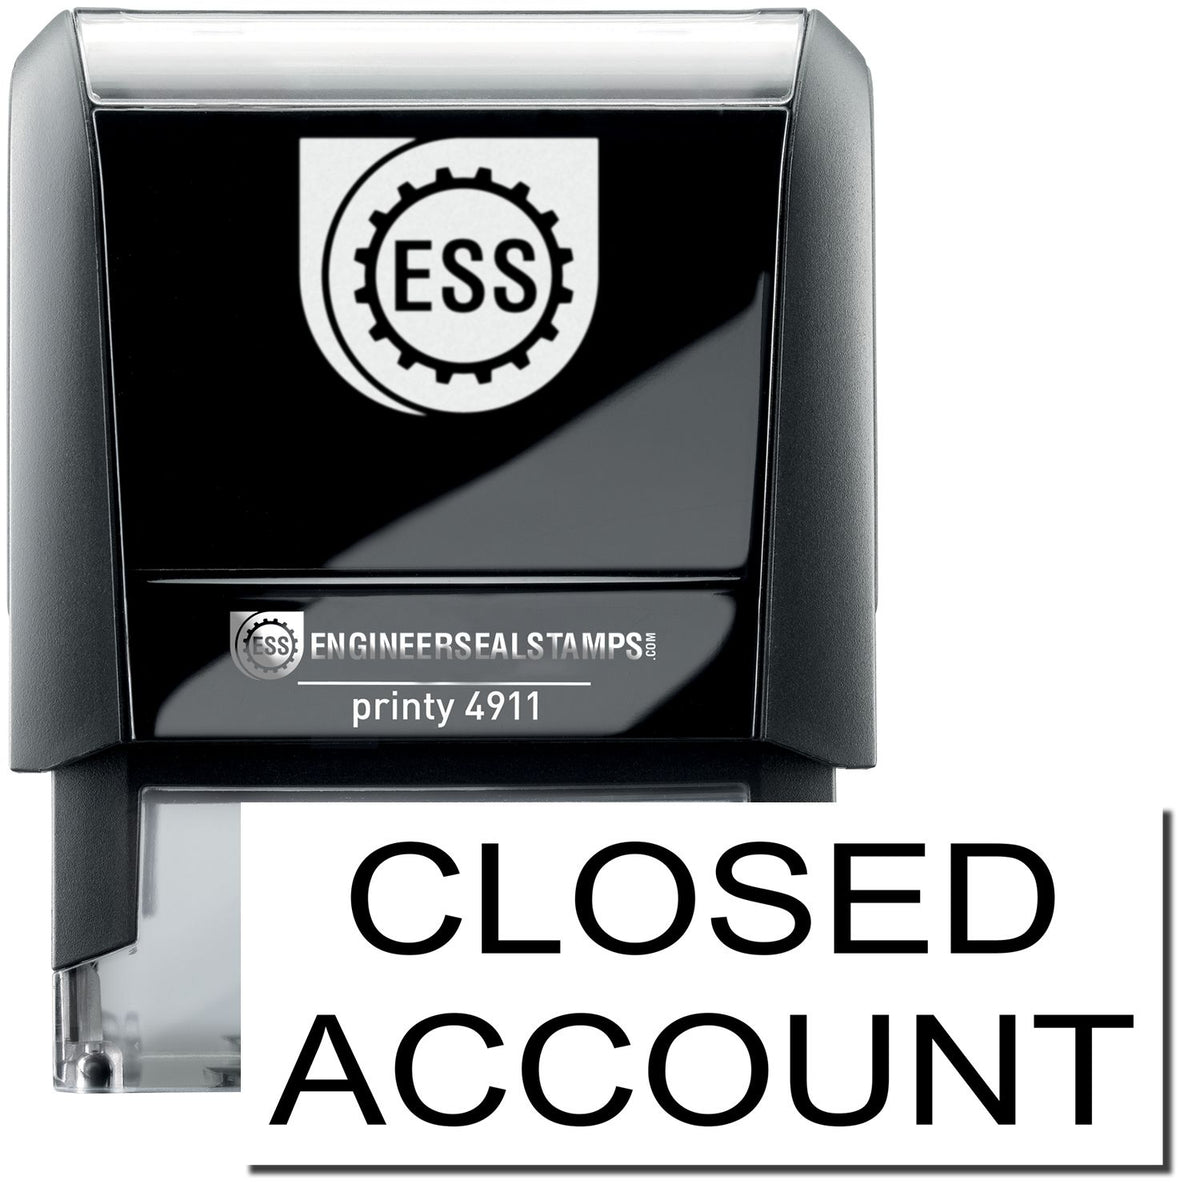 A self-inking stamp with a stamped image showing how the text &quot;CLOSED ACCOUNT&quot; is displayed after stamping.